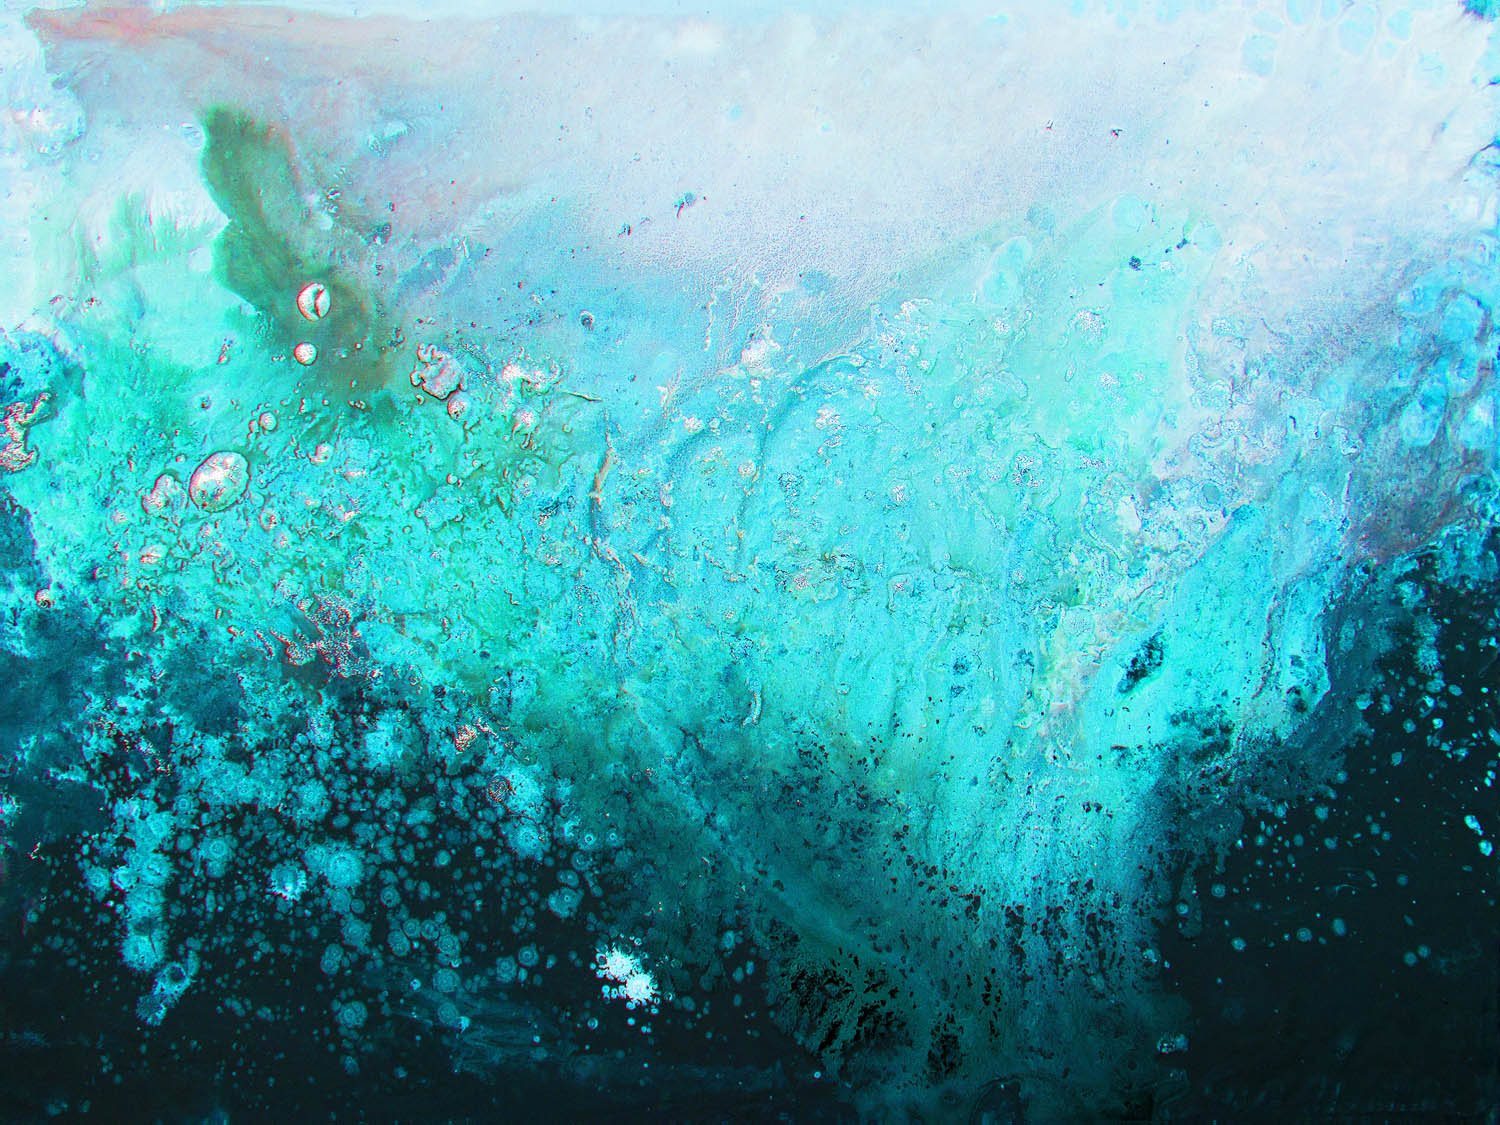 Teal & Turquoise Abstract Wall Art Print - Louise Mead